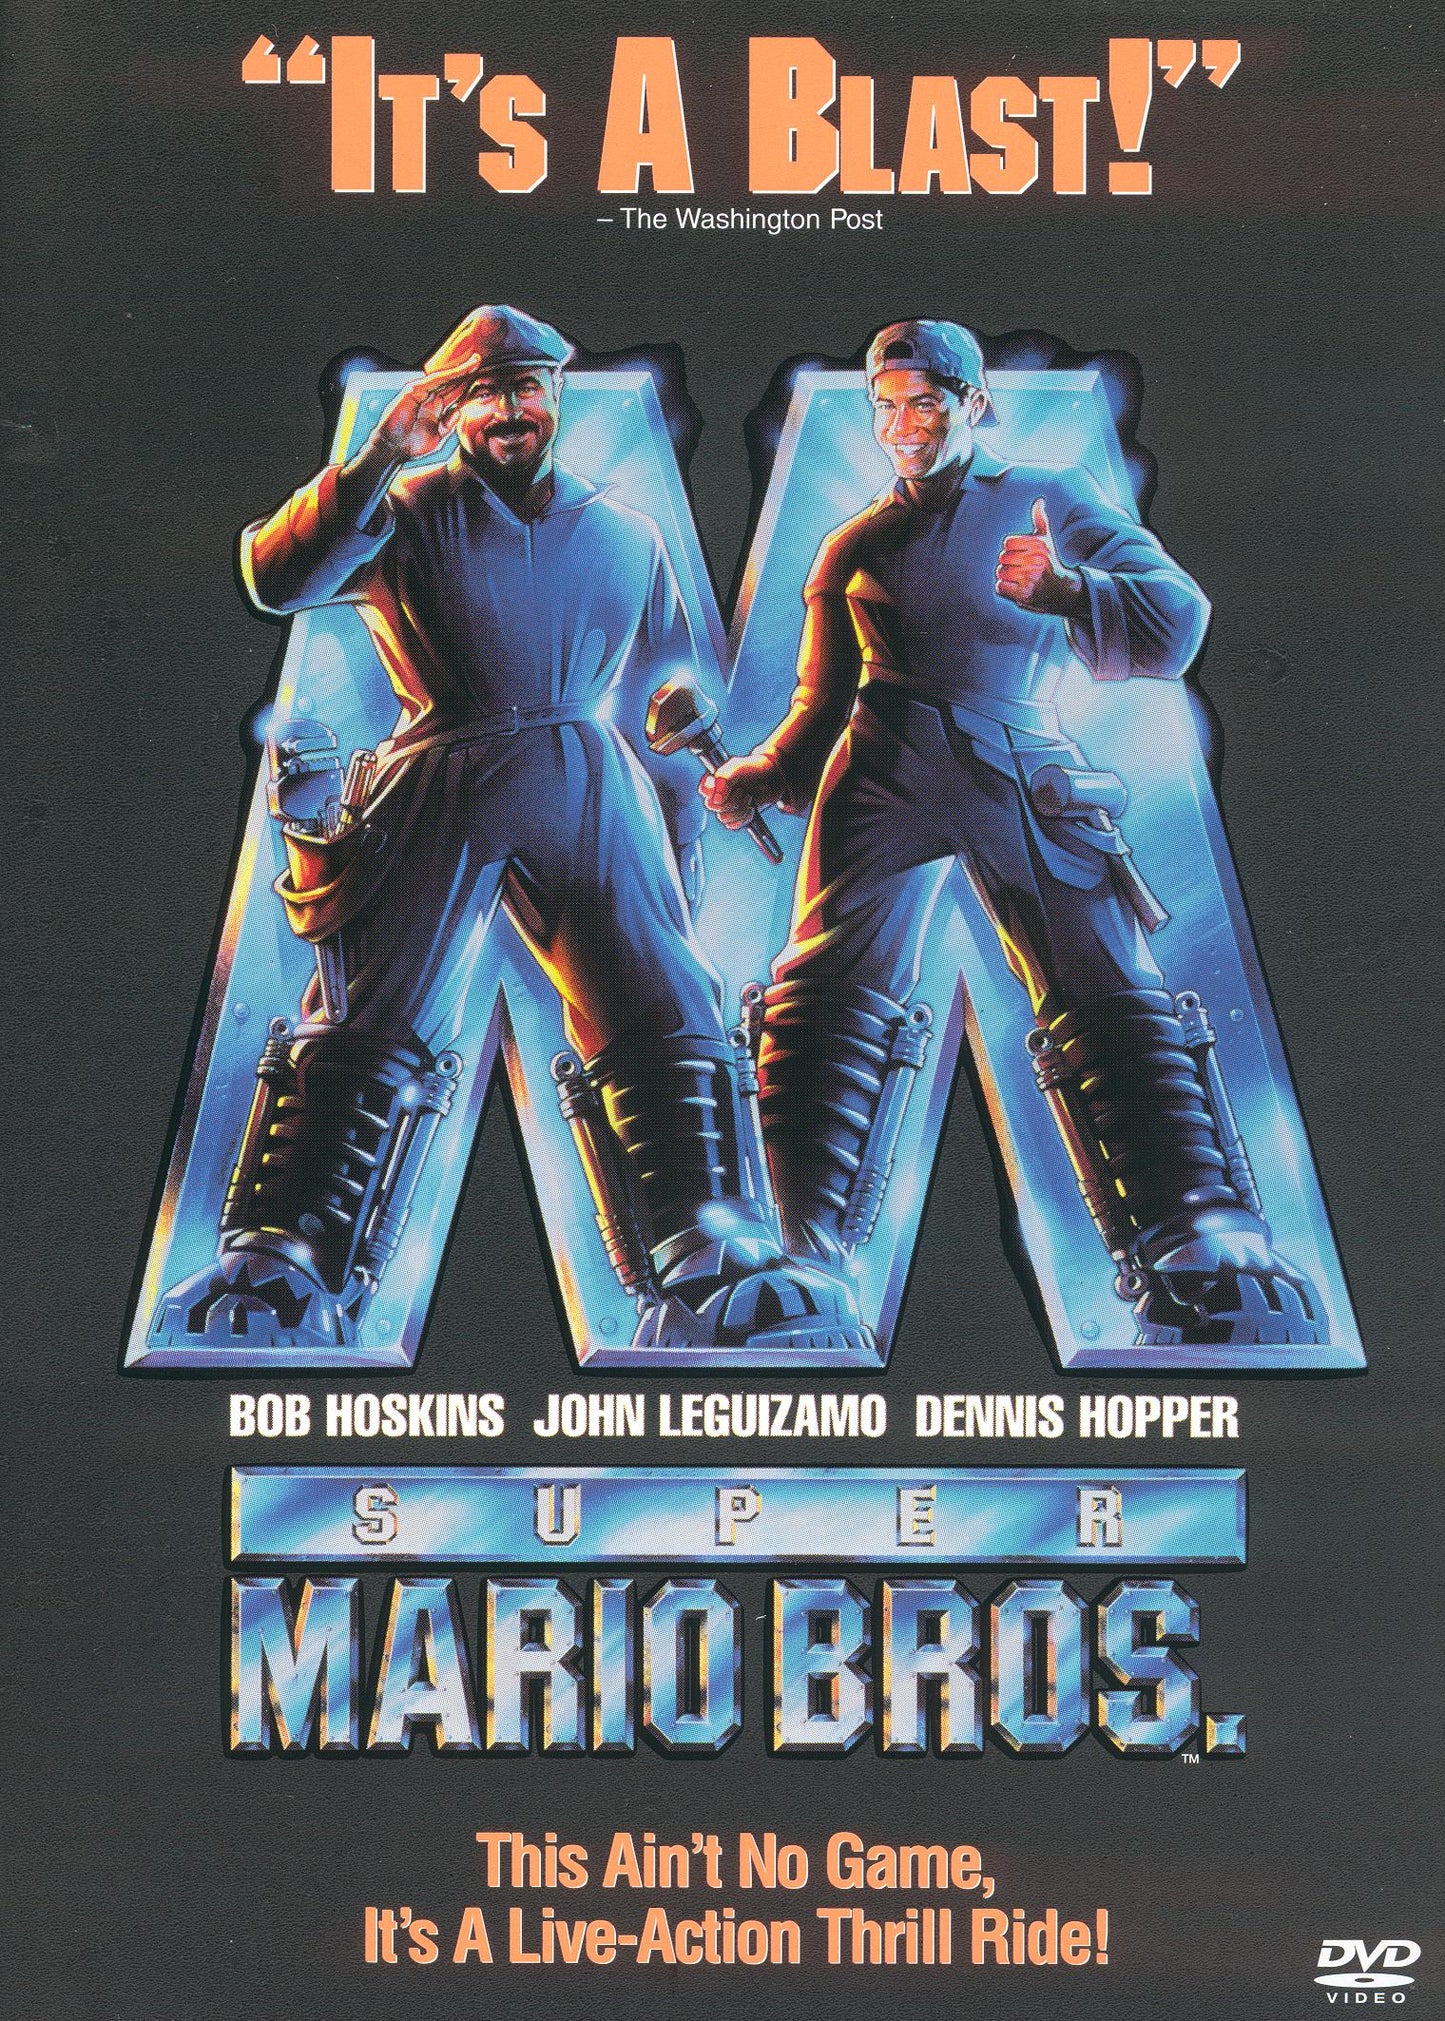 Super Mario Brothers cover art